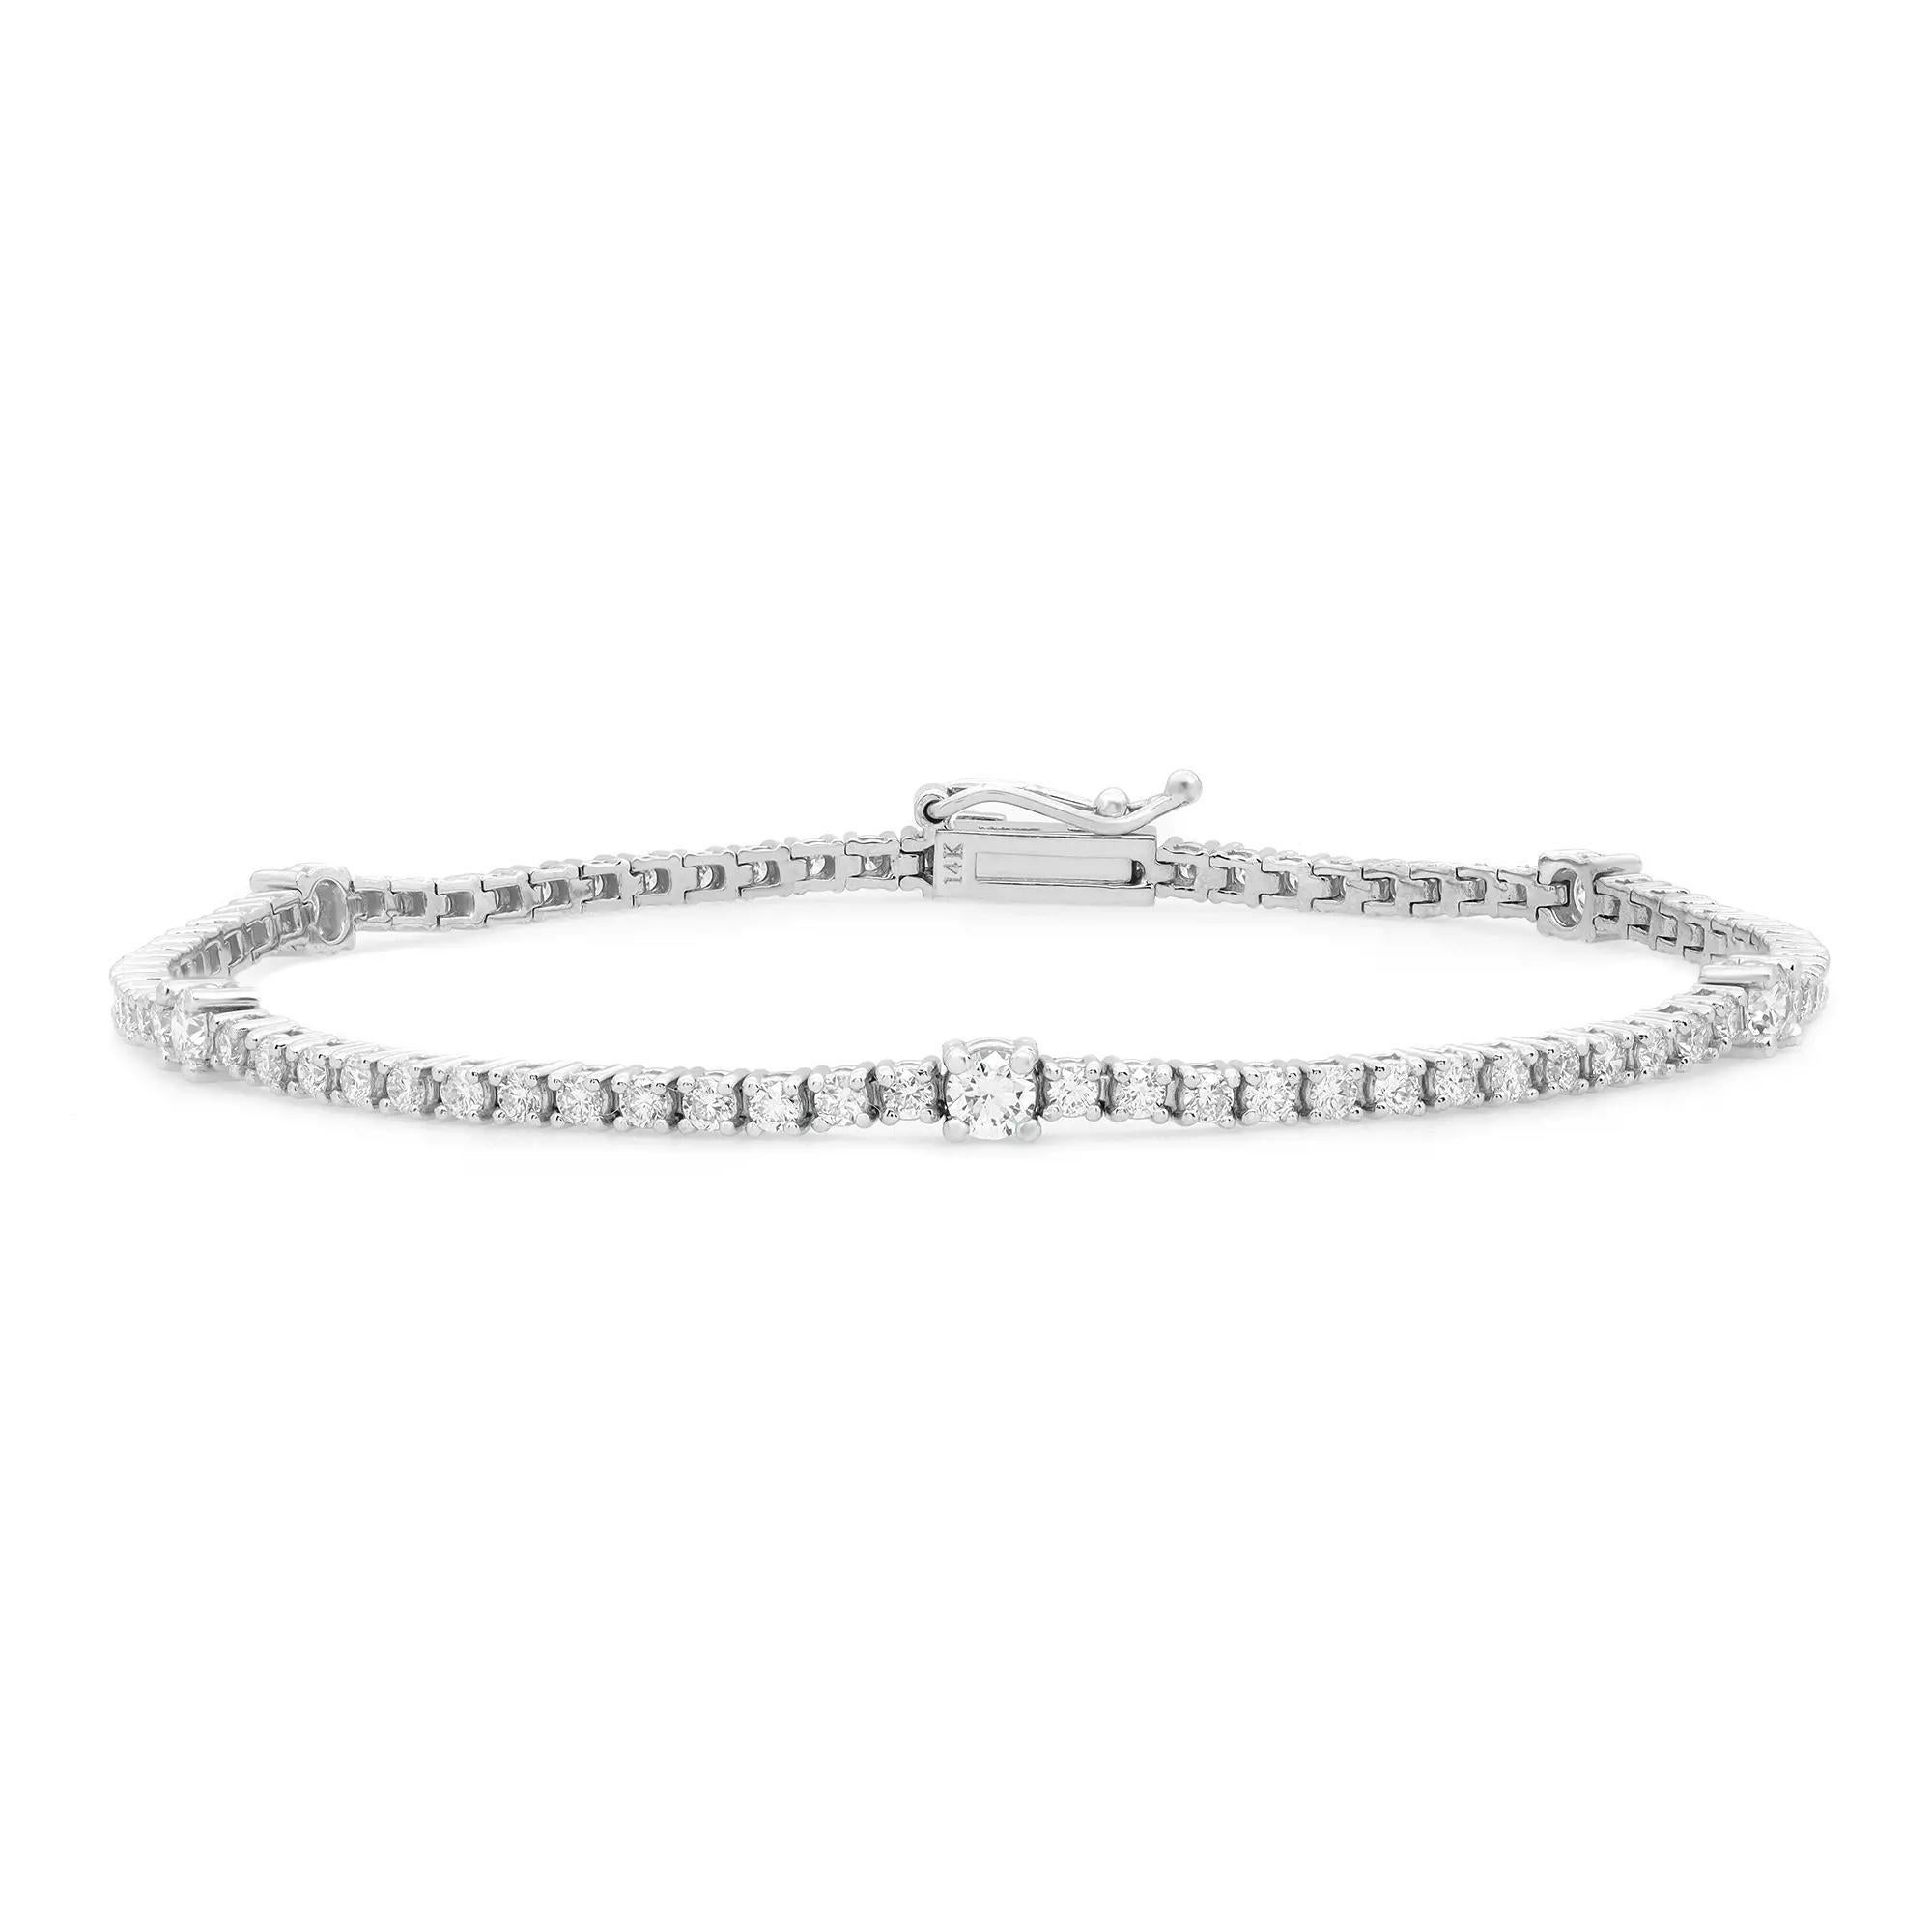 Classic yet elegant, this breathtaking tennis bracelet is crafted in 14K white gold with 88 prong set dazzling round brilliant cut diamonds. Total diamond weight: 2.07 carats with 5 diamonds size 8pt and the rest 2pt each. The bright white diamonds